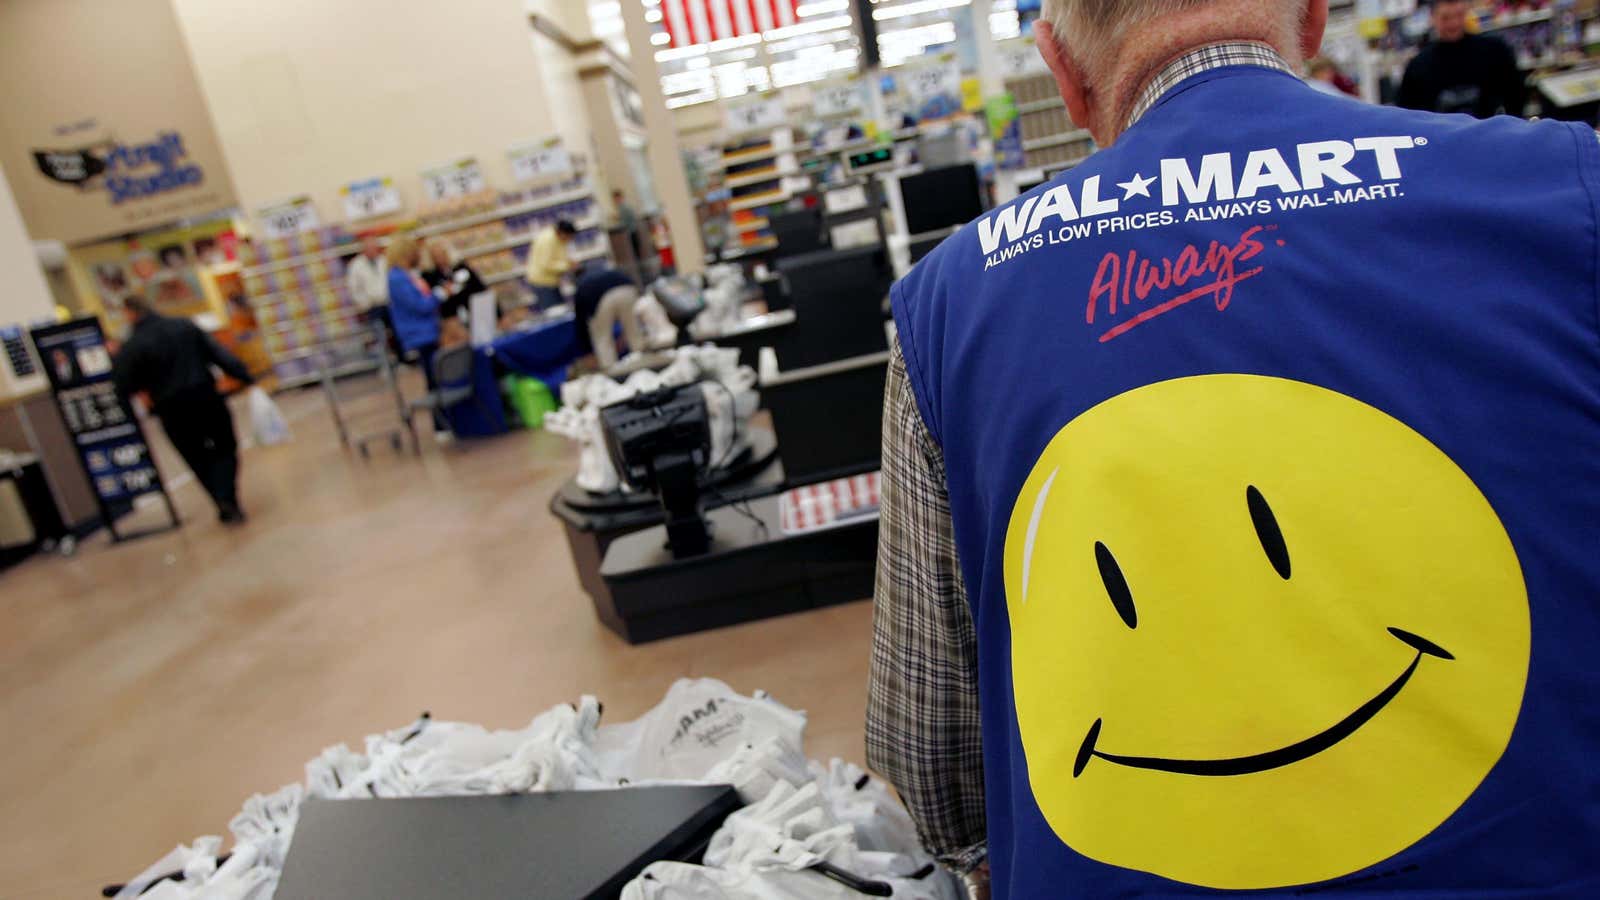 Walmart upped its reputation by bringing attention to its Katrina relief efforts in 2005.